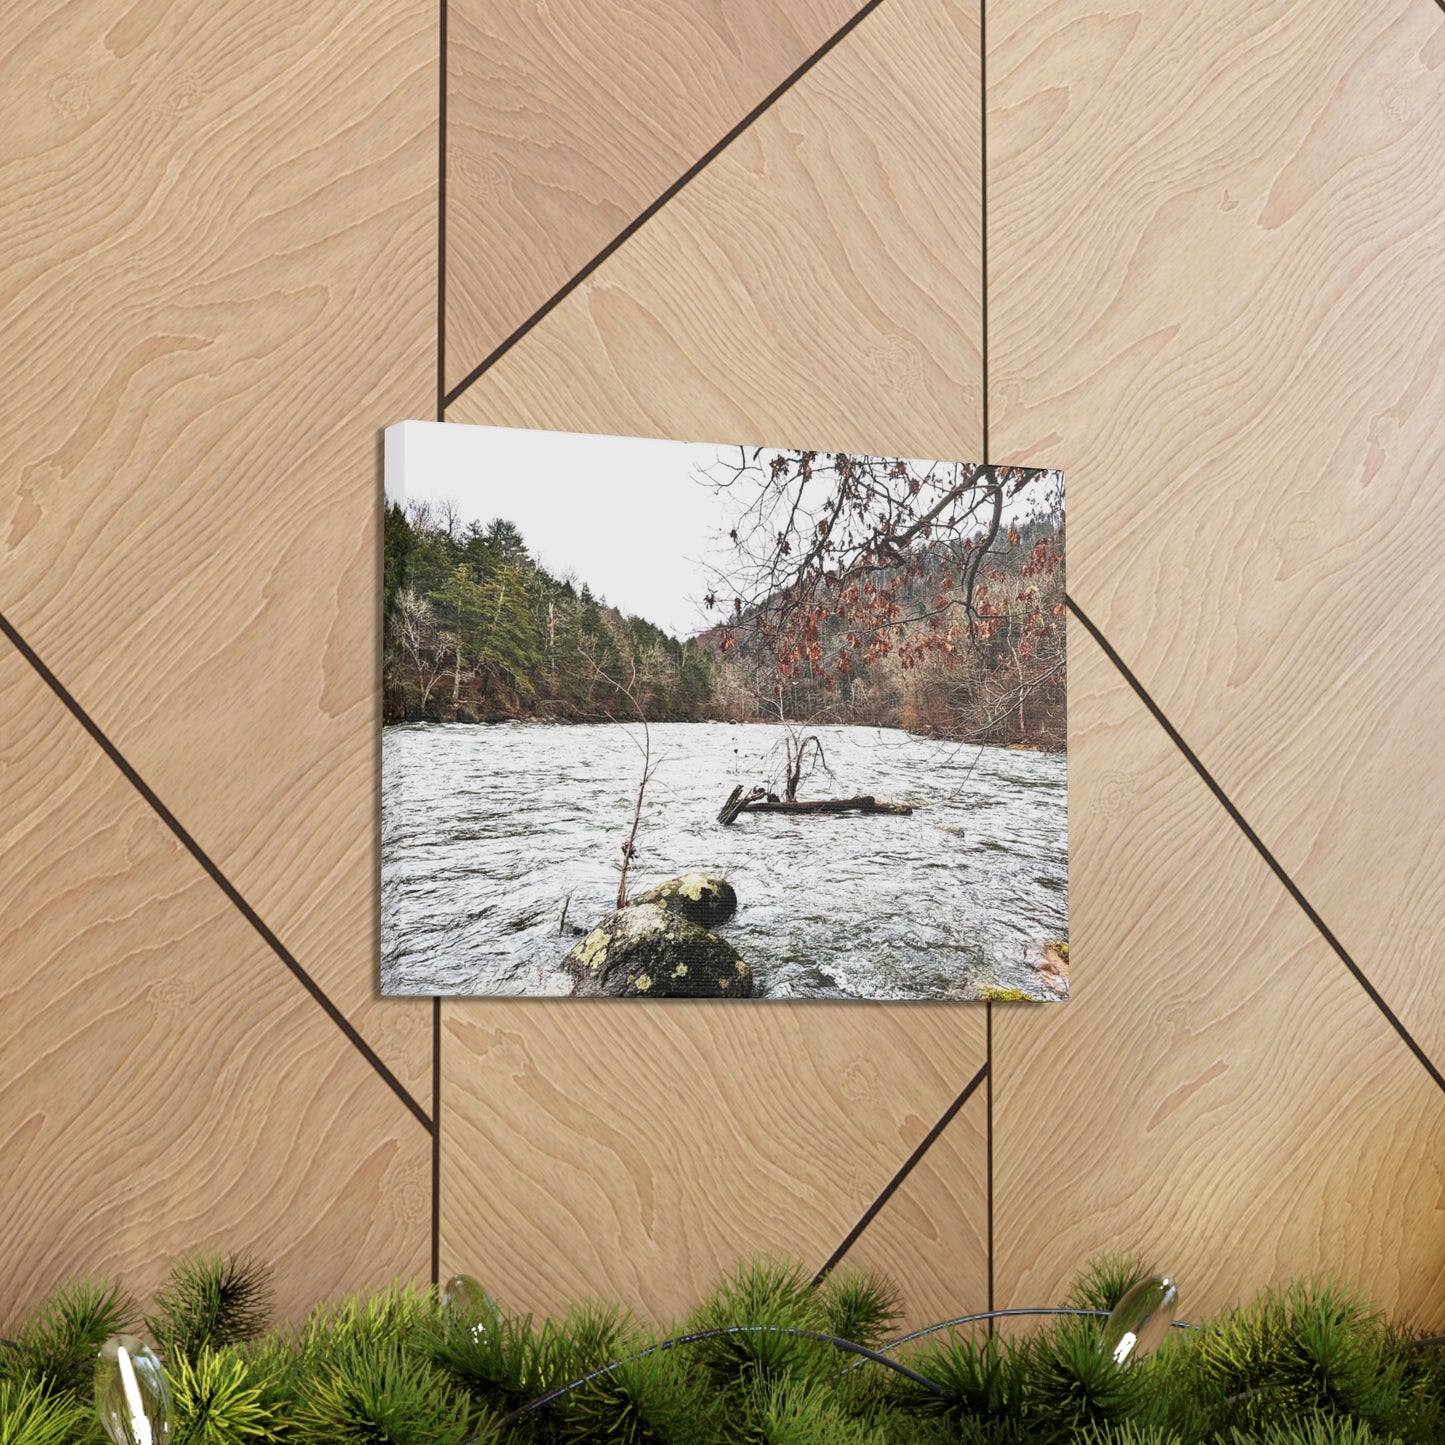 Houstatonic and Tenmile River Canvas Art Print